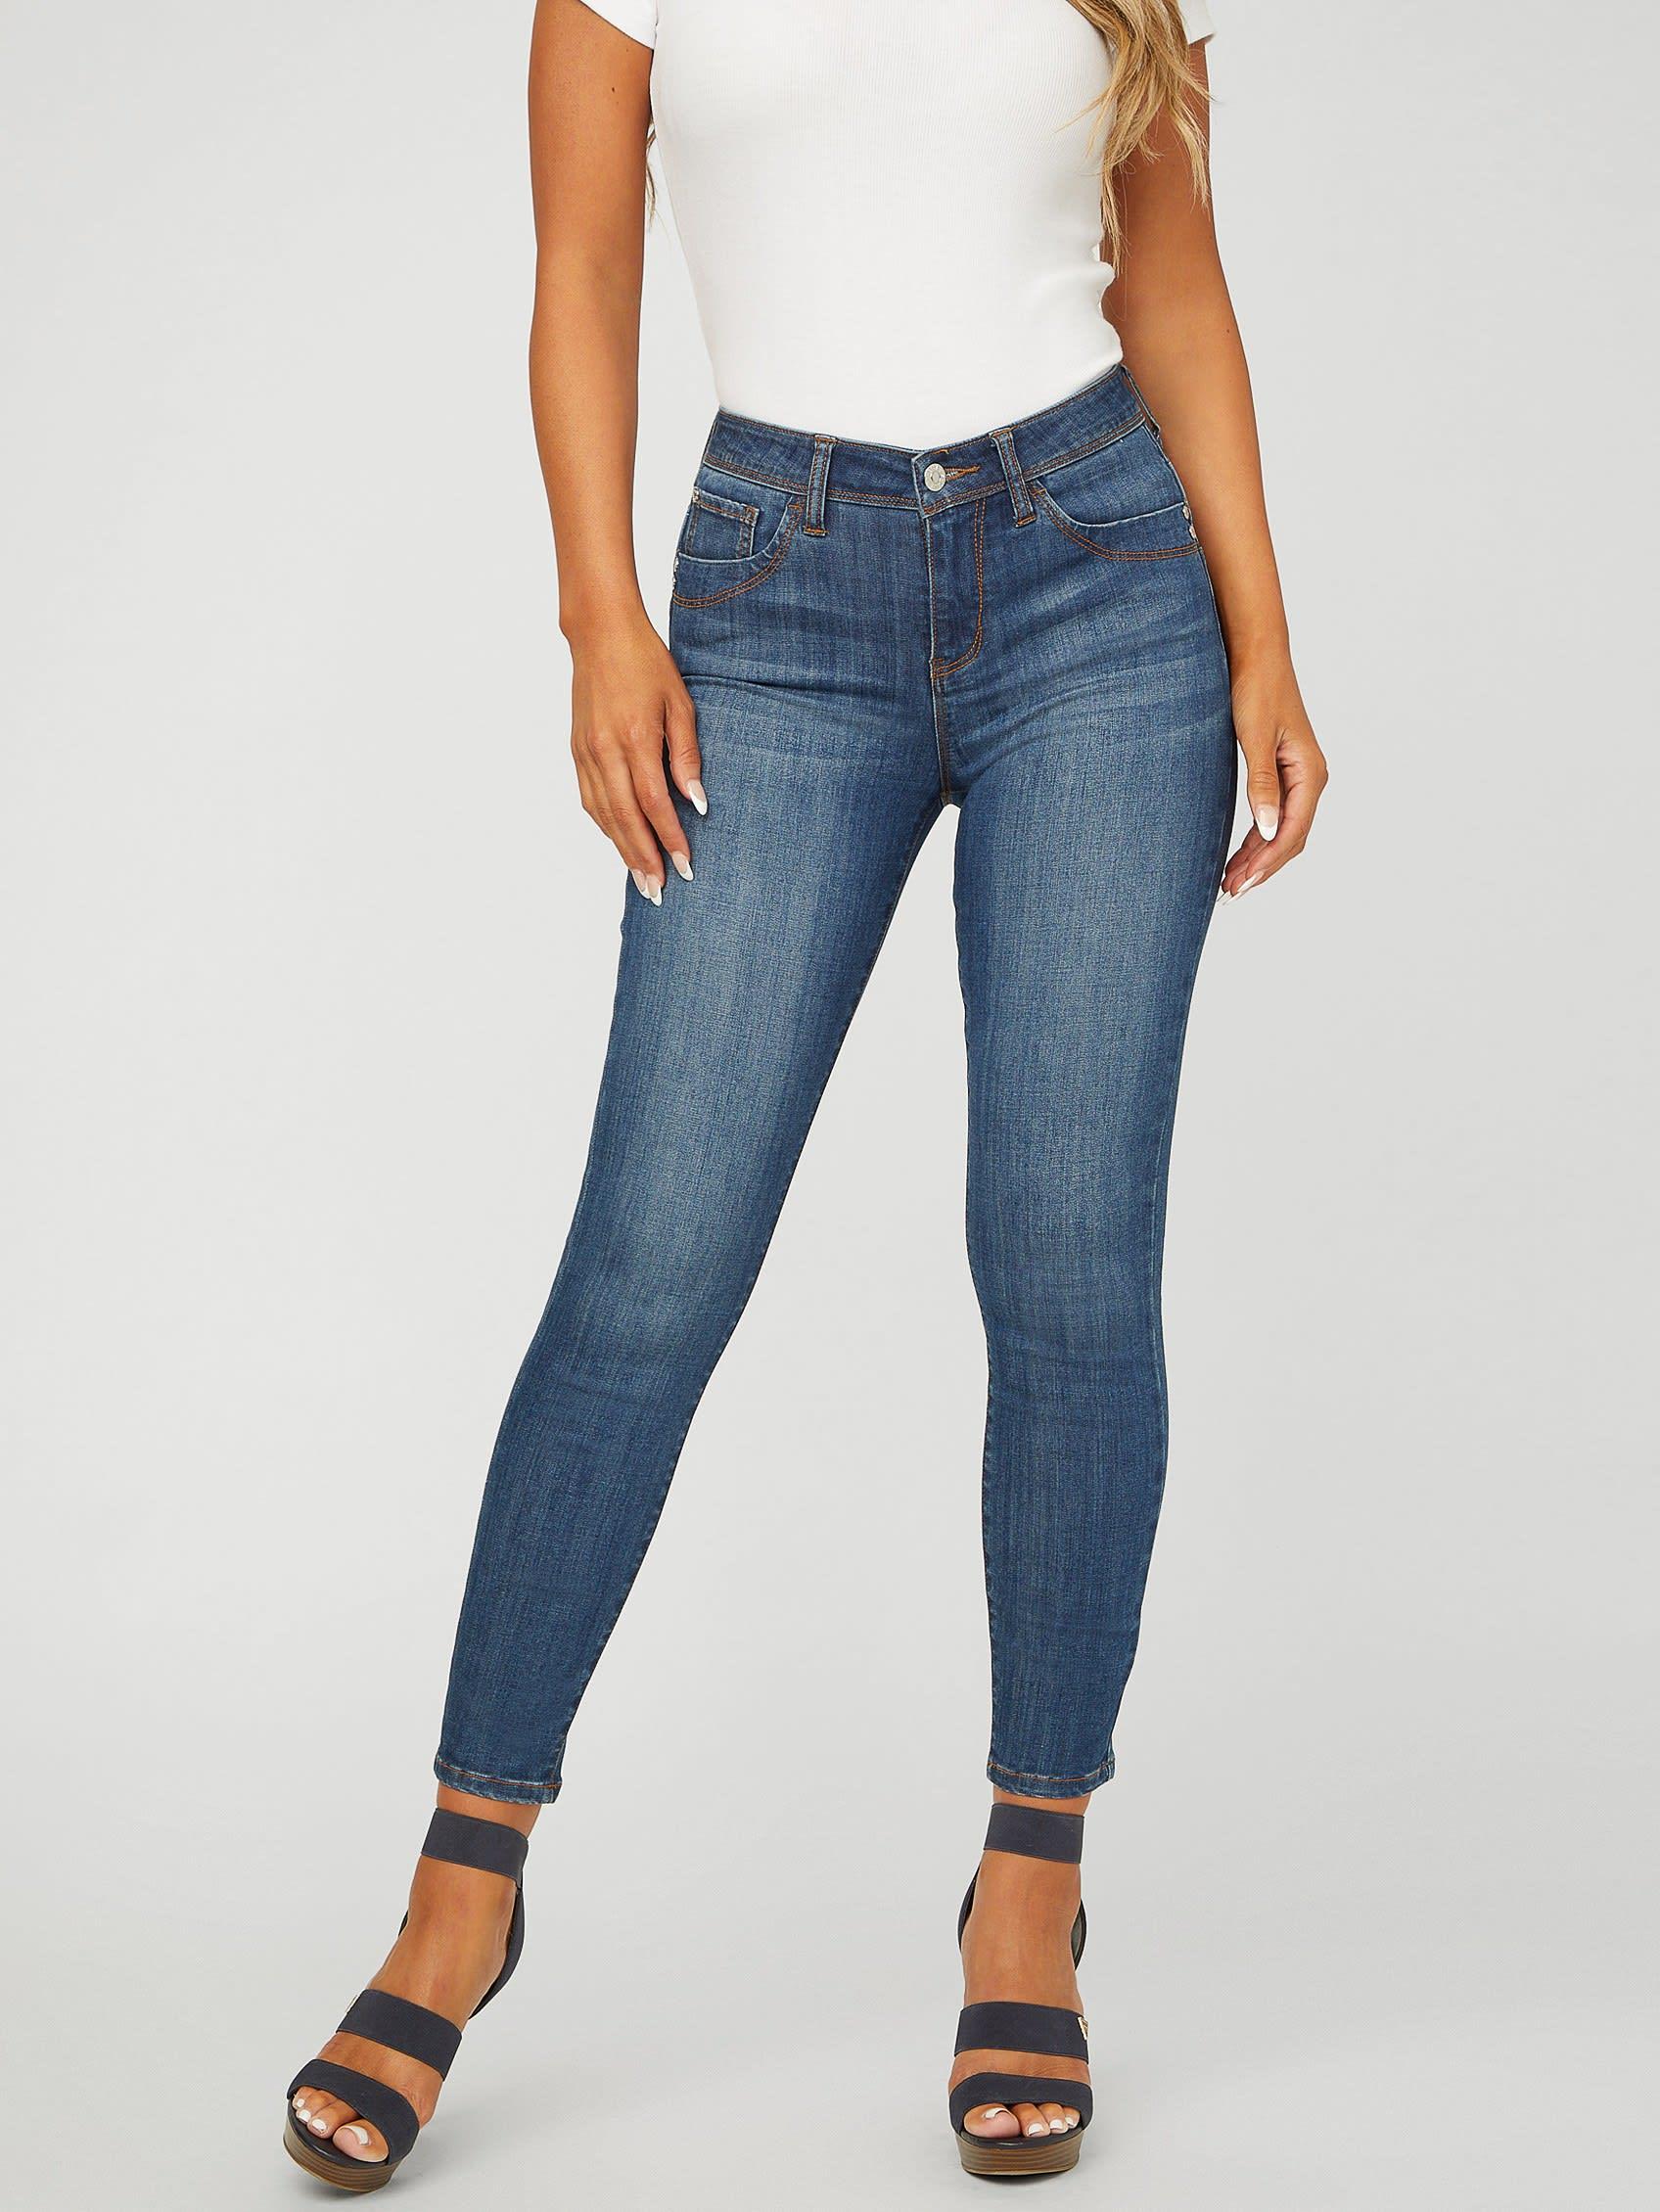 Guess Factory Beyla Curvy Mid-rise Jeans in Blue | Lyst